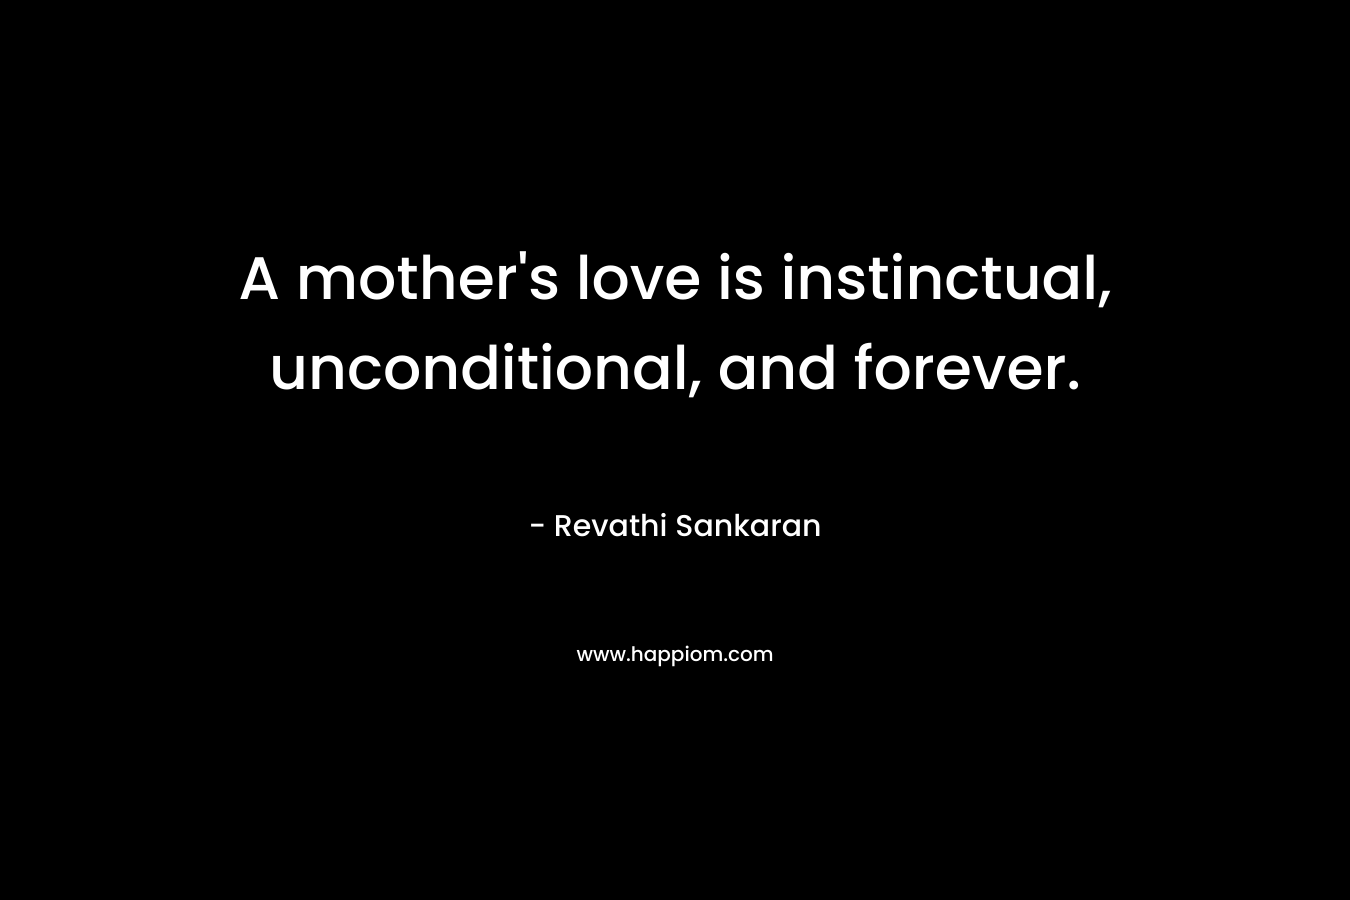 A mother’s love is instinctual, unconditional, and forever. – Revathi Sankaran